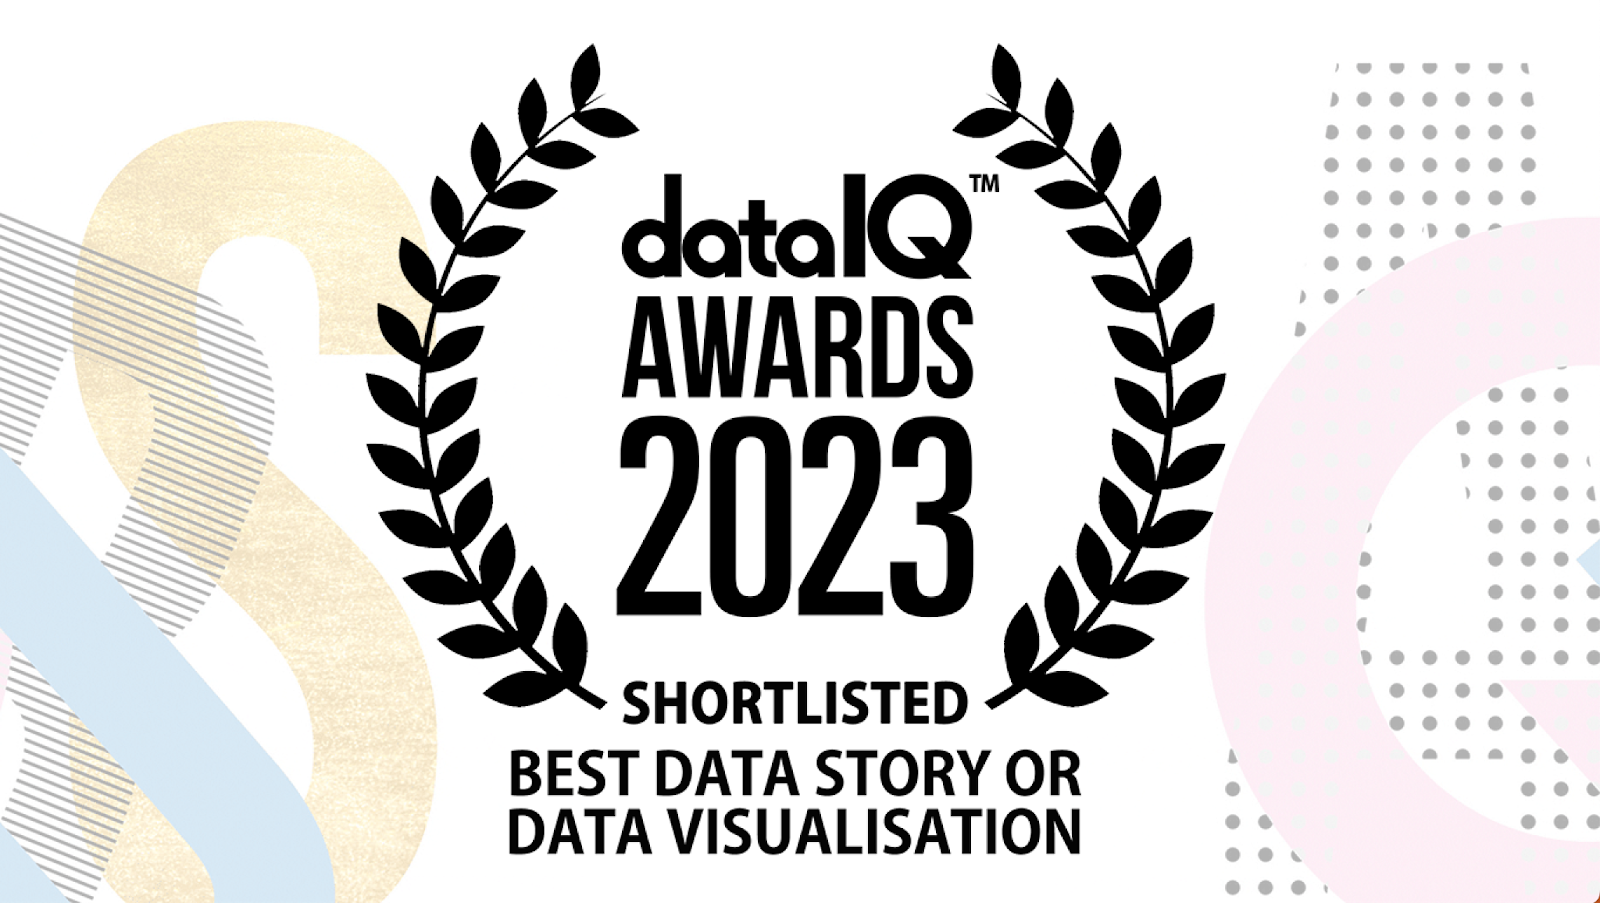 Airfinity Shortlisted for DataIQ Awards 2023 ‘Best Data Story or Data Visualisation’